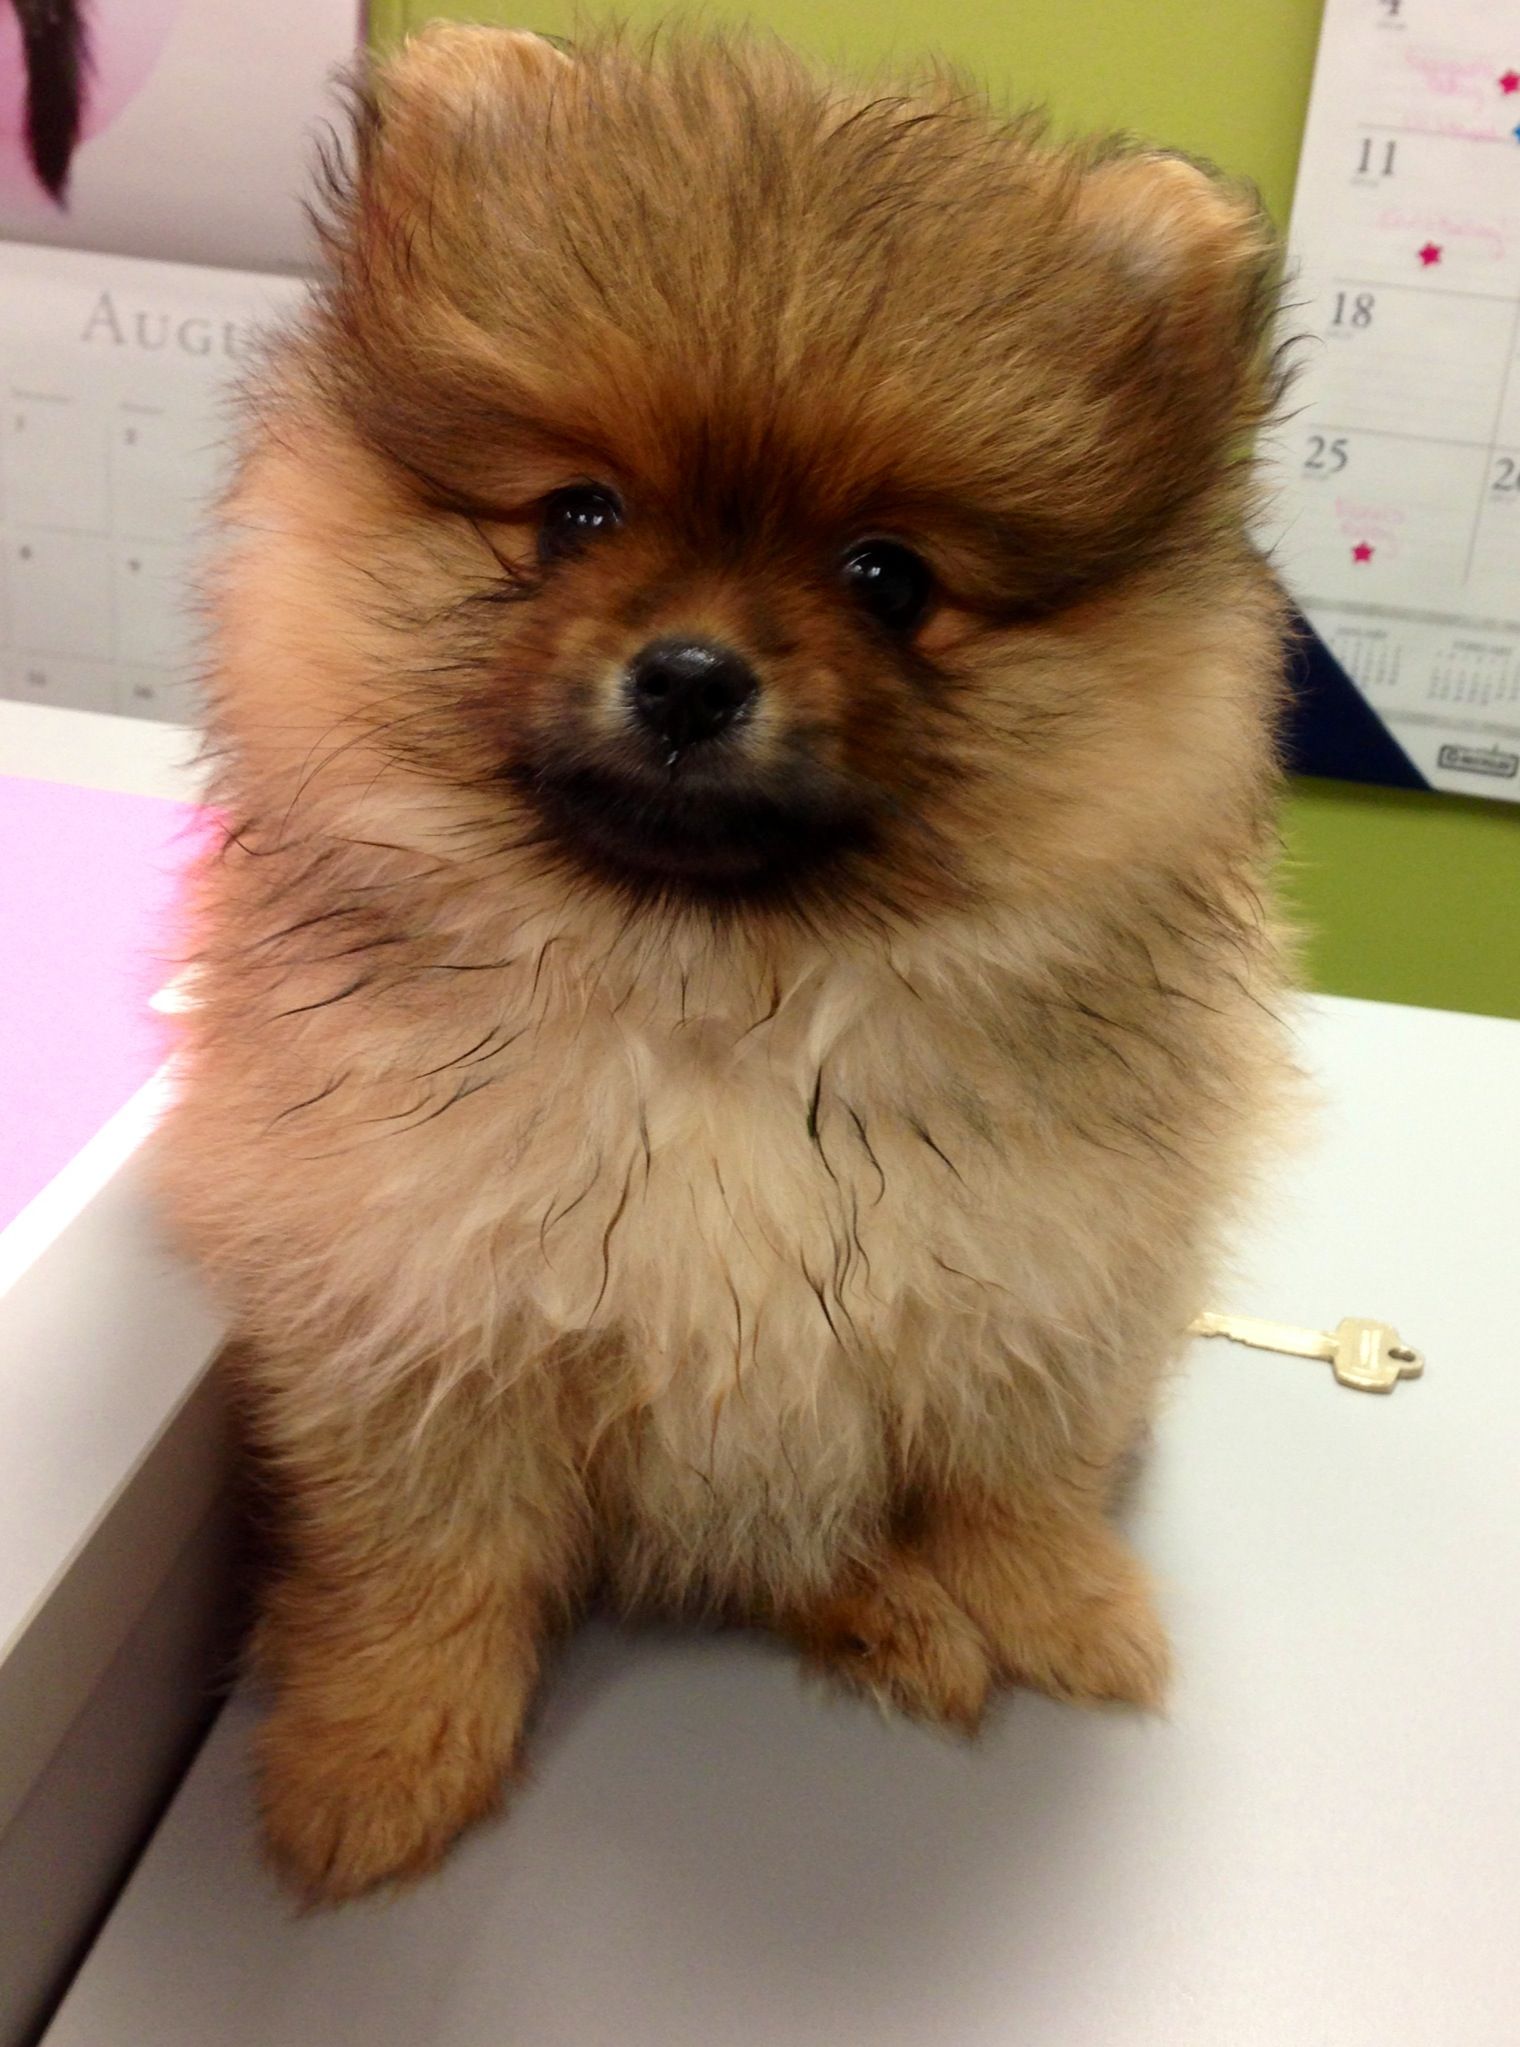 Pomeranian for sale! Amazing coat and the perfect little teddy bear face!